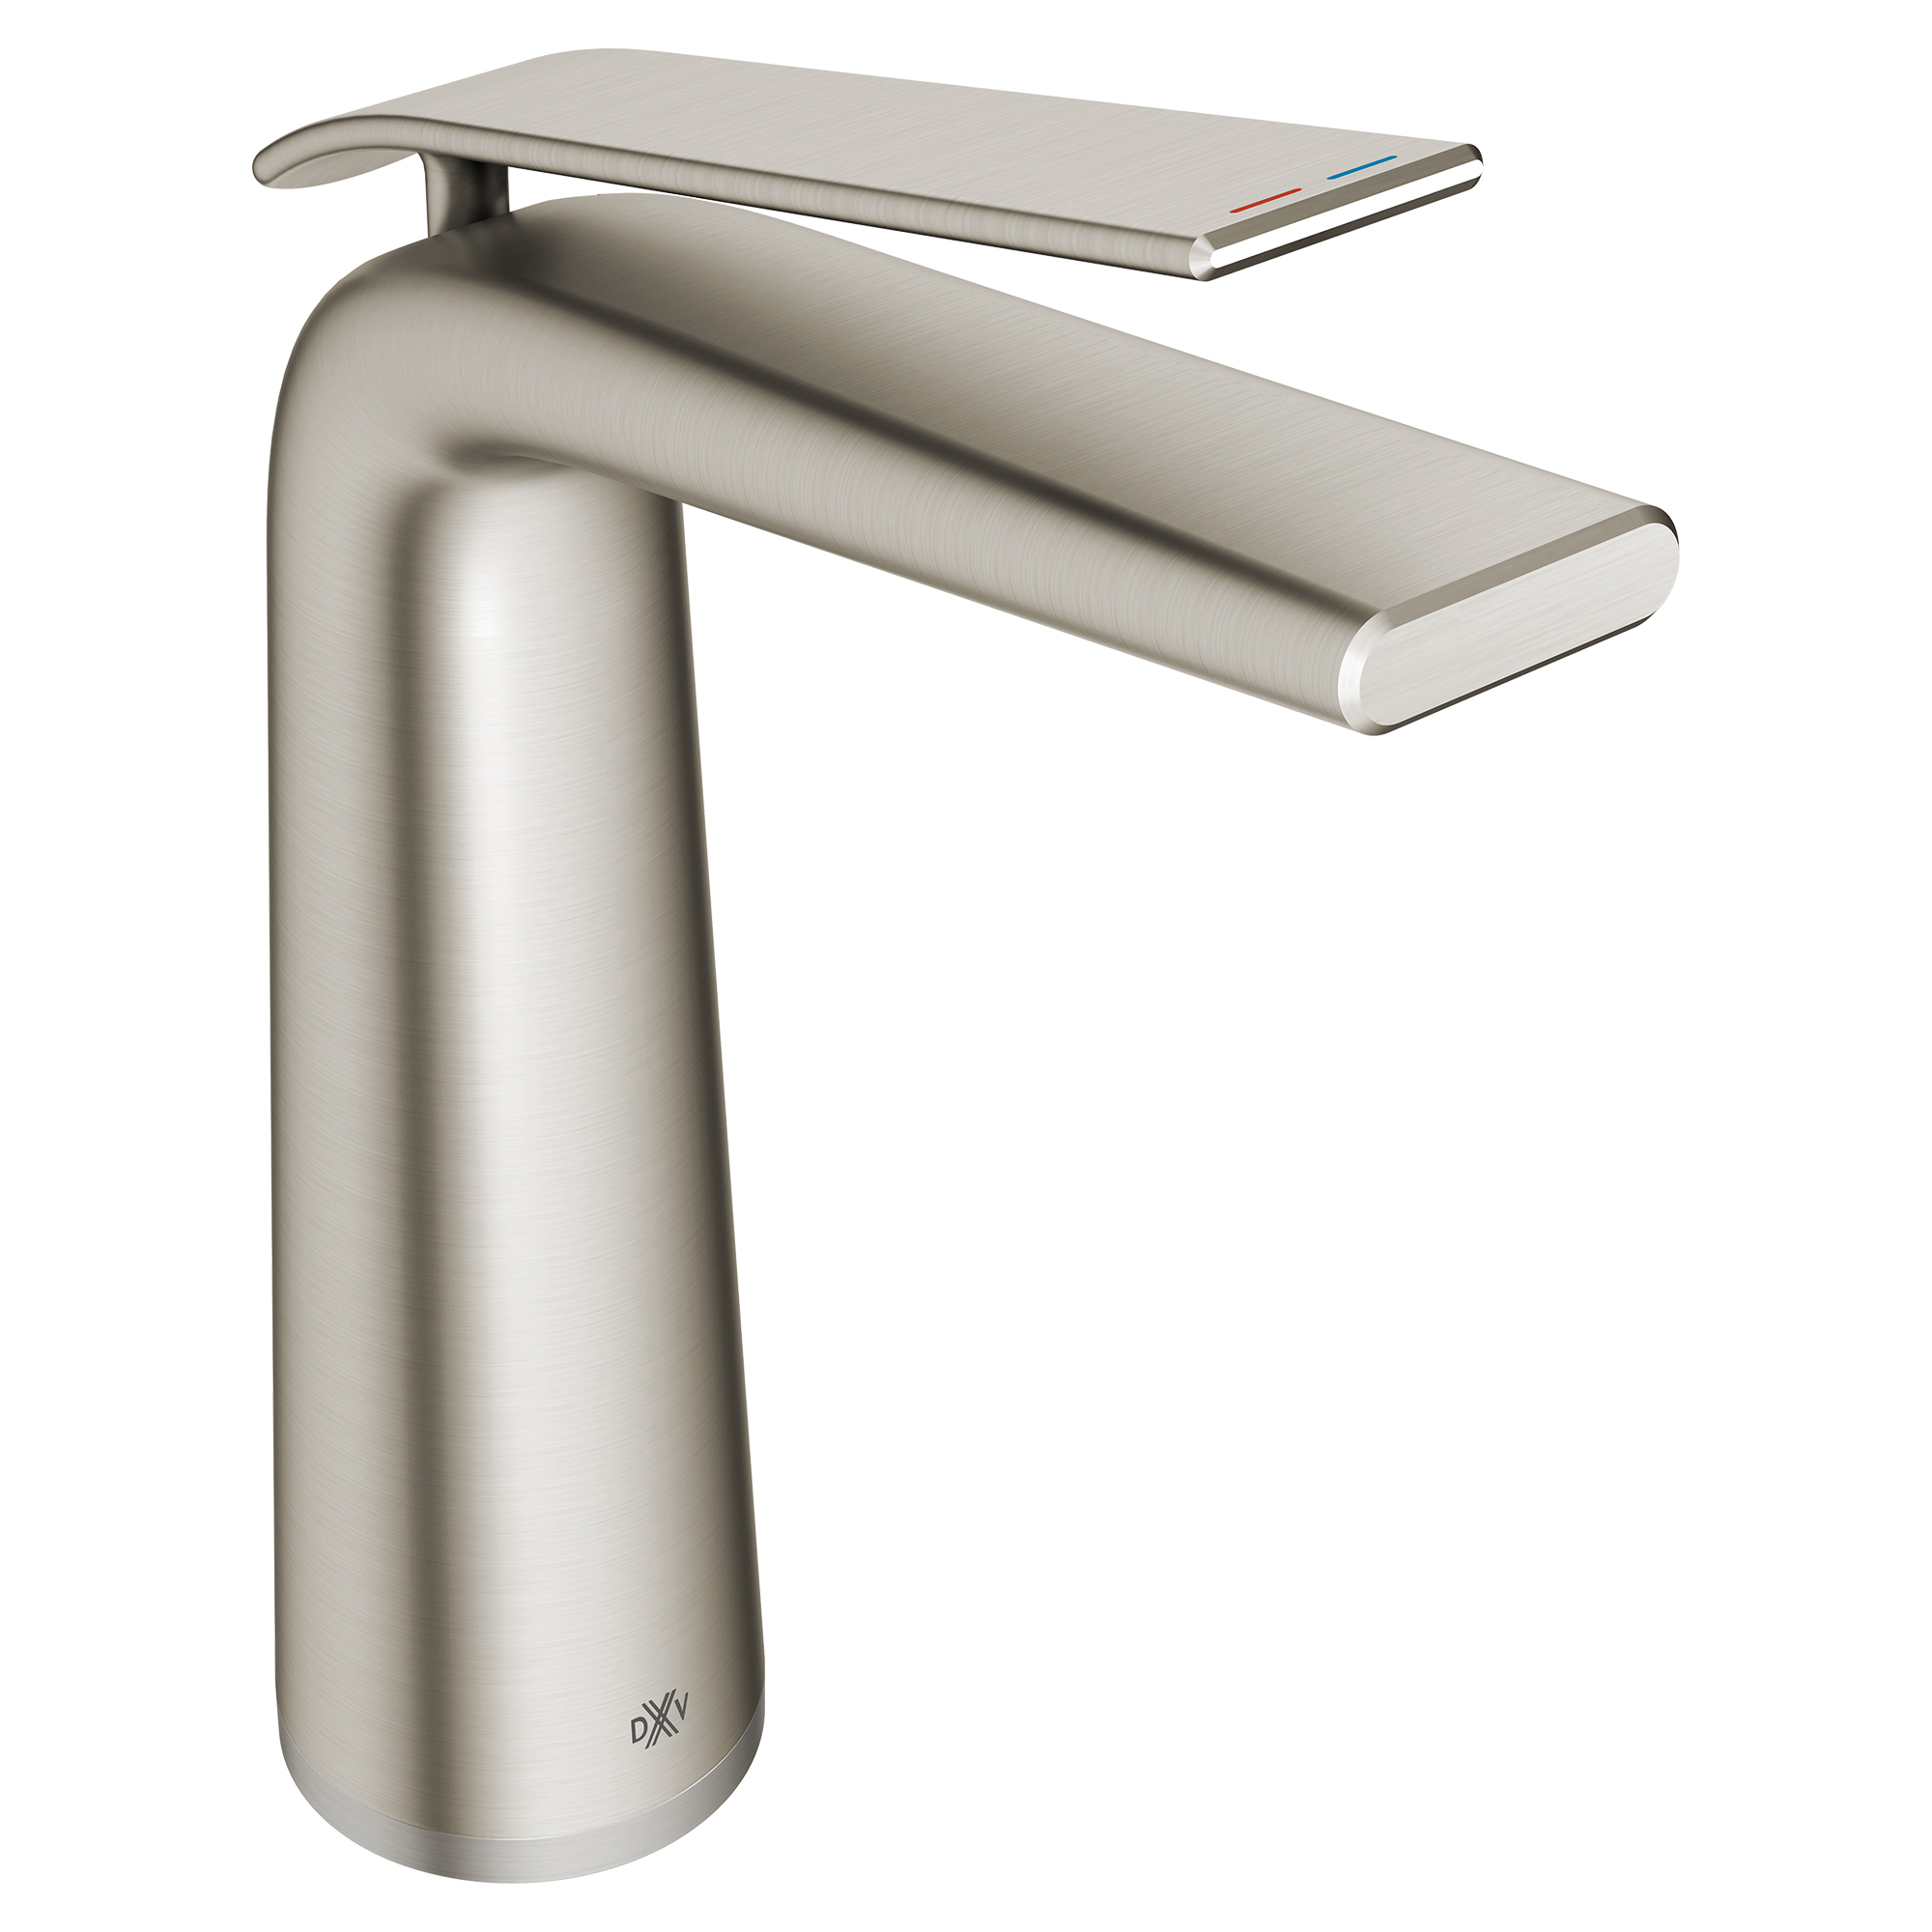 DXV Modulus Single Handle Vessel Bathroom Faucet with Indicator Markings and Lever Handle